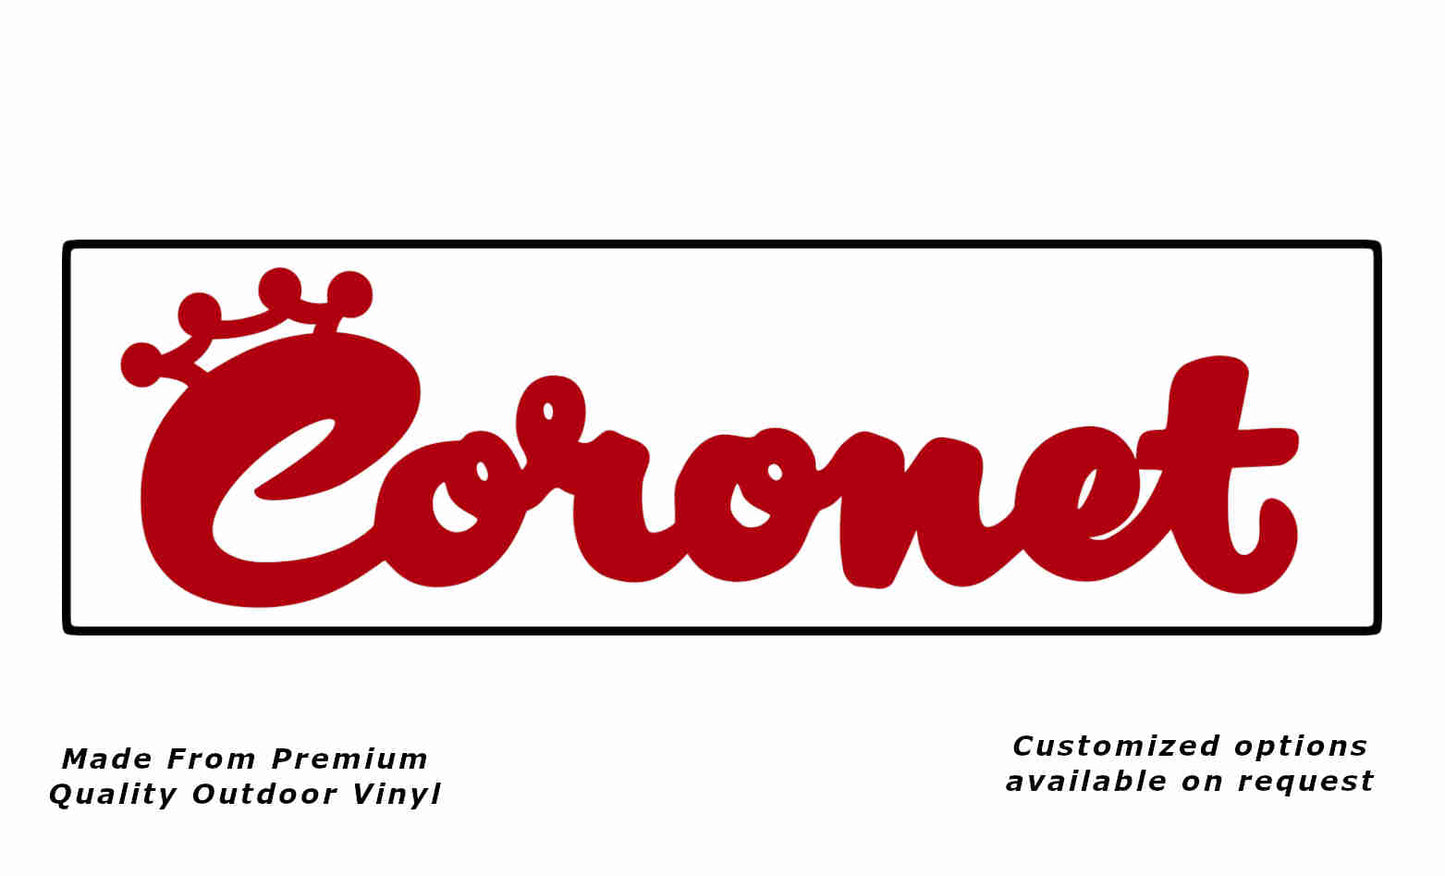 Coronet with border caravan replacement vinyl decal sticker in red and black.